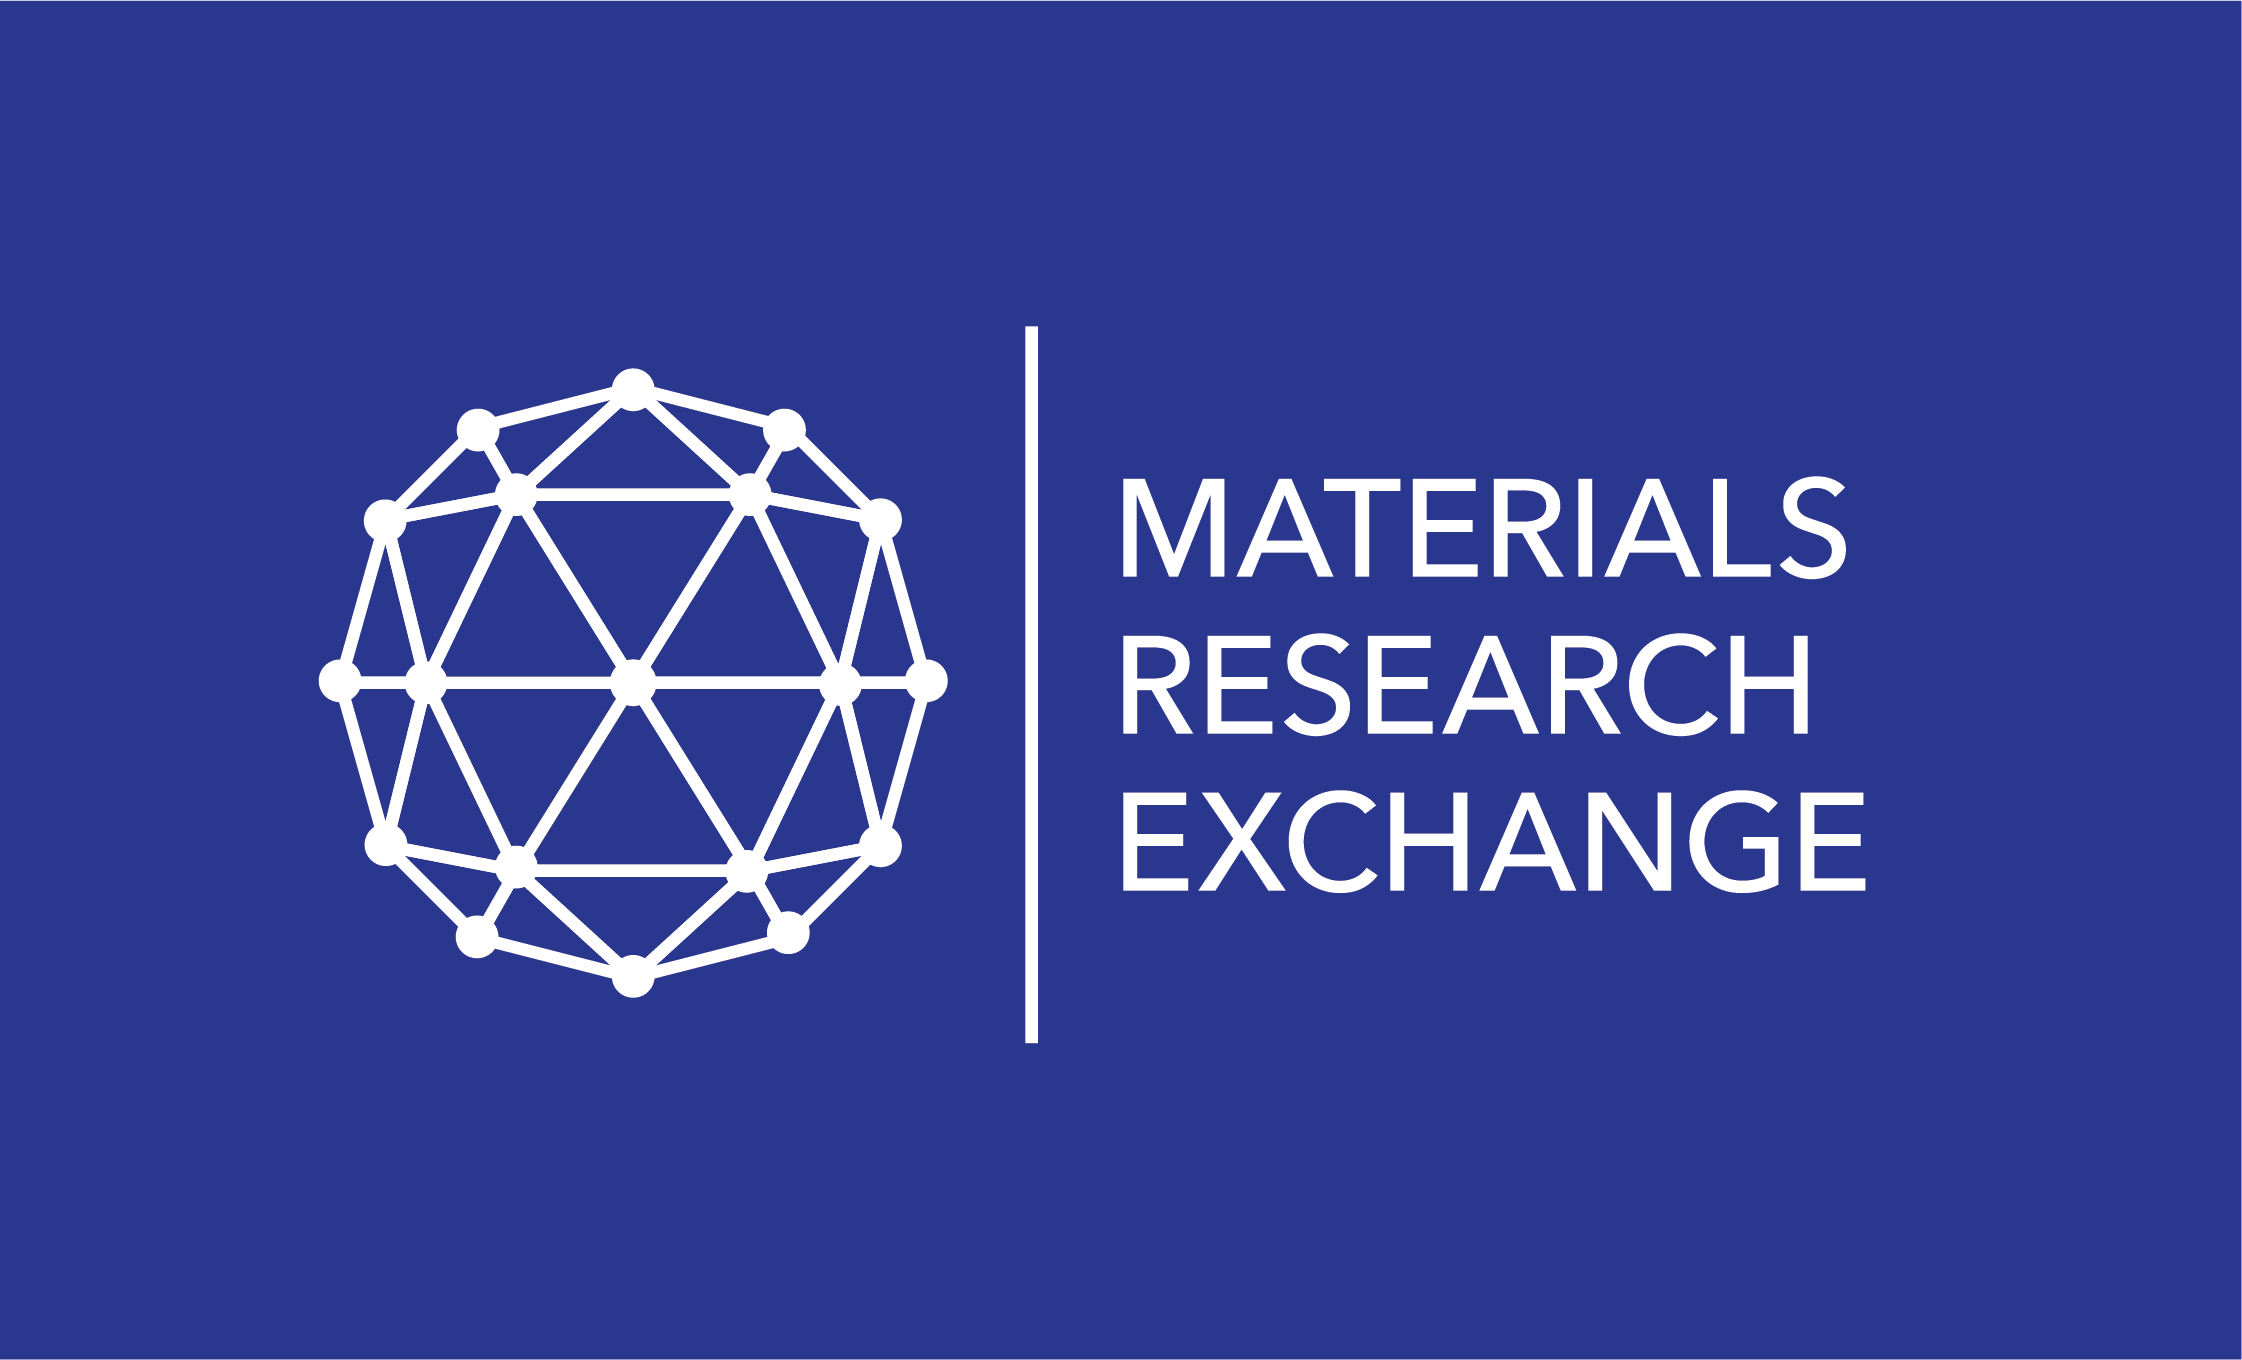 Save the Date for Materials Research Exchange (MRE) 2022: 3rd – 5th October 2022